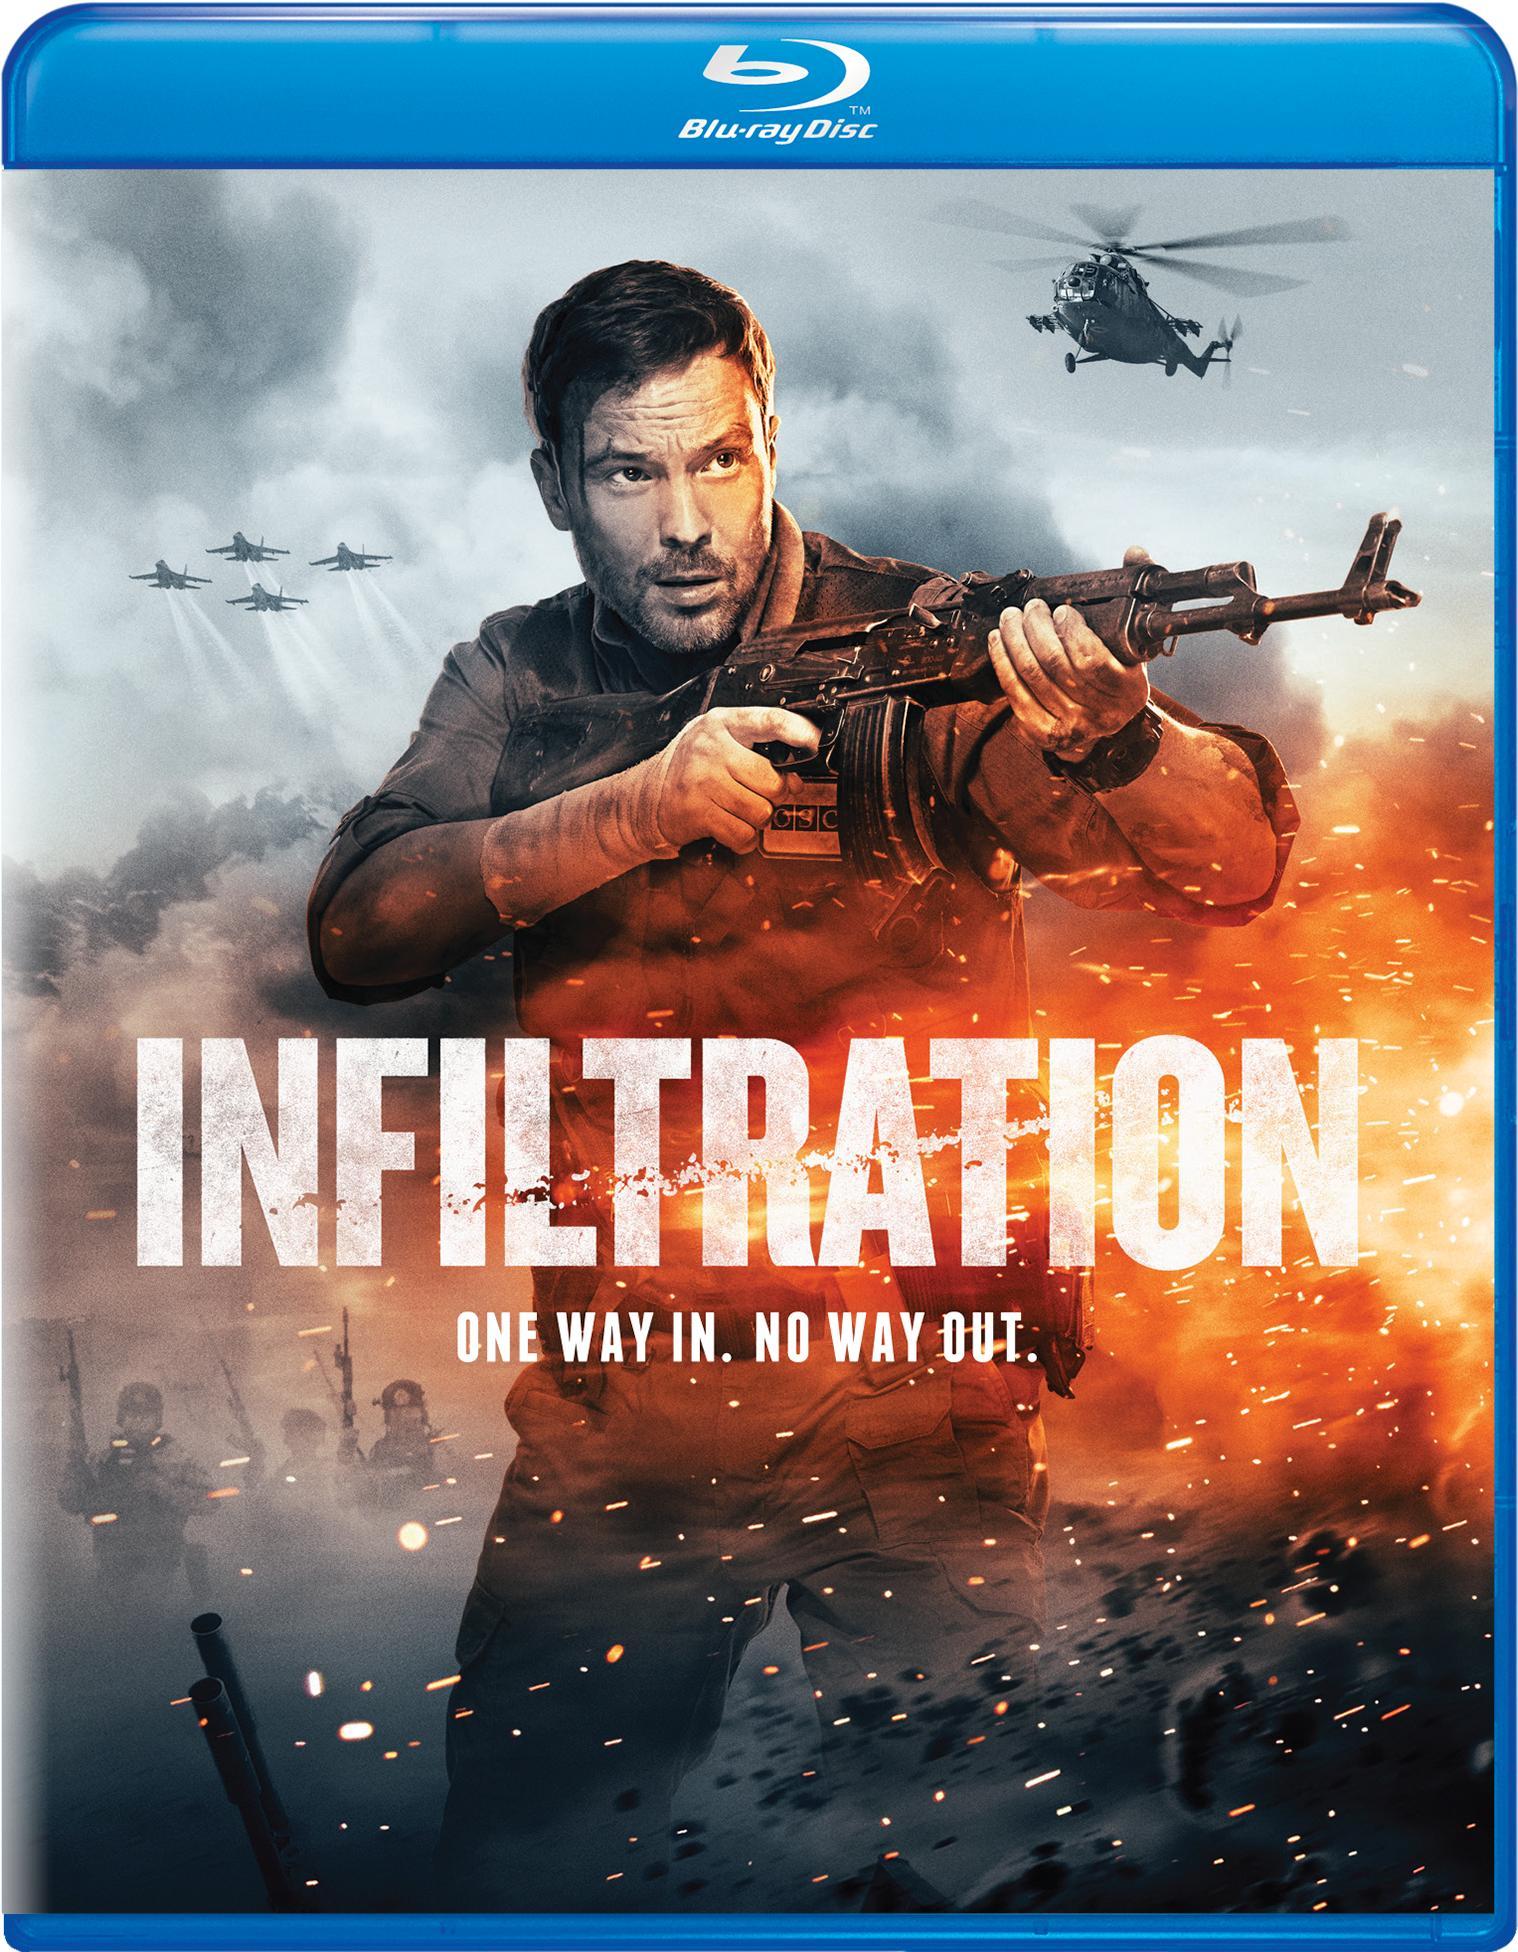 Infiltration - Blu-ray [ 2022 ]  - Foreign Movies On Blu-ray - Movies On GRUV